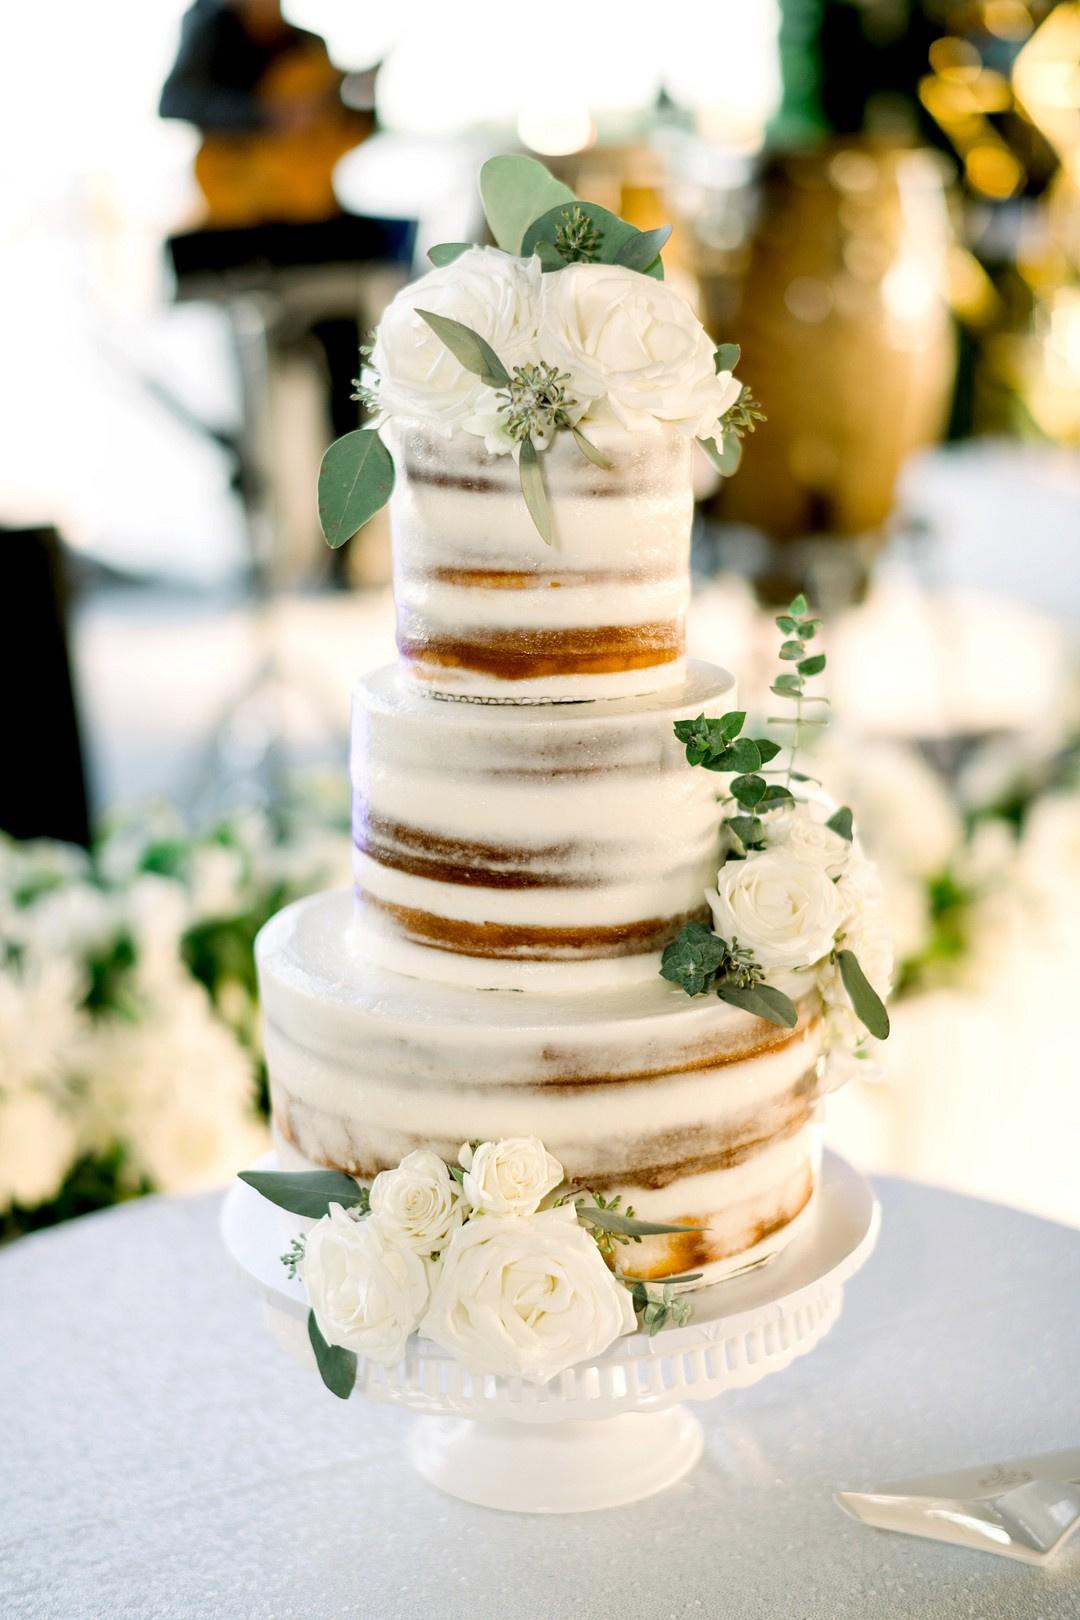 17 Three Tier Wedding Cakes That Make Show Stopping Desserts 